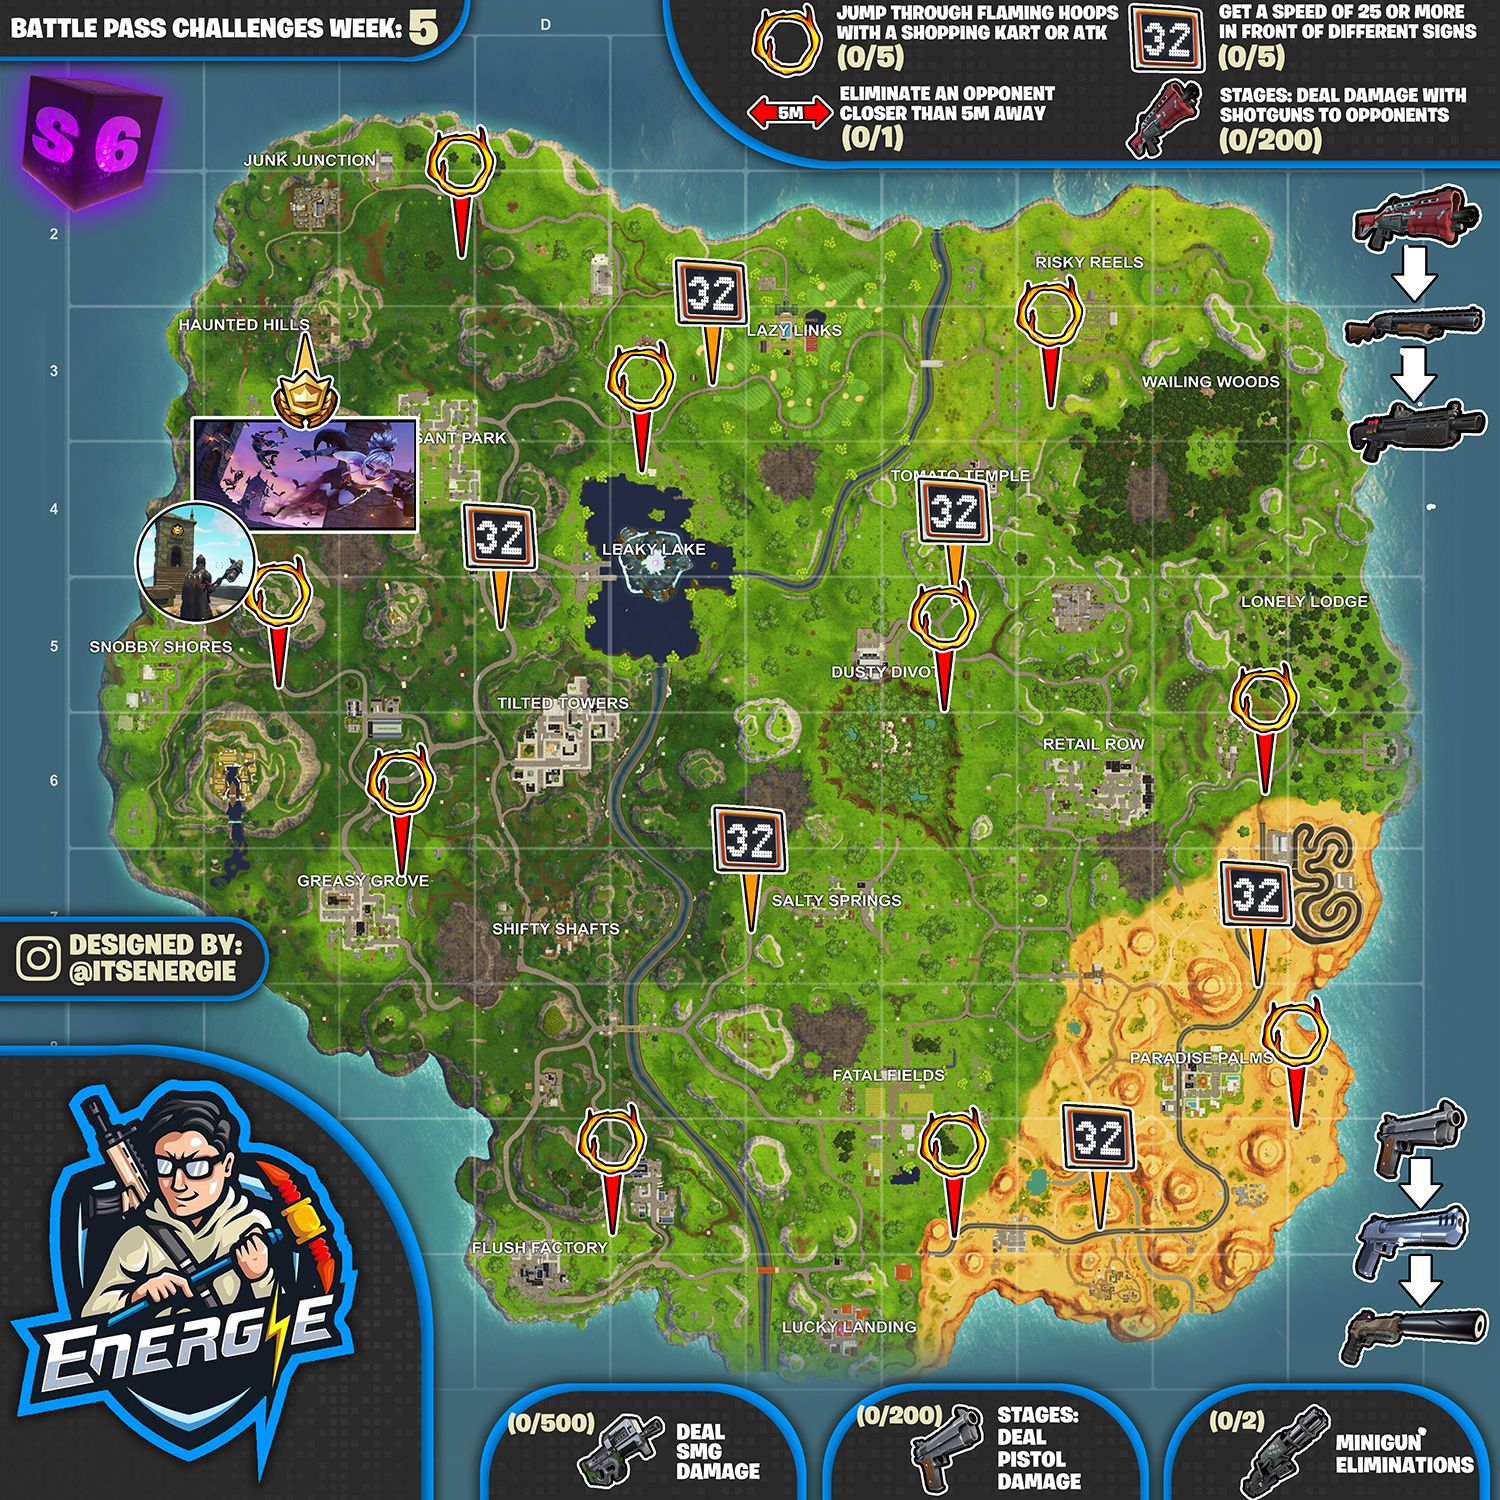 for those struggling with any of the challenges here s a cheat sheet from itsenergie - fortnite challenges week 2 cheat sheet